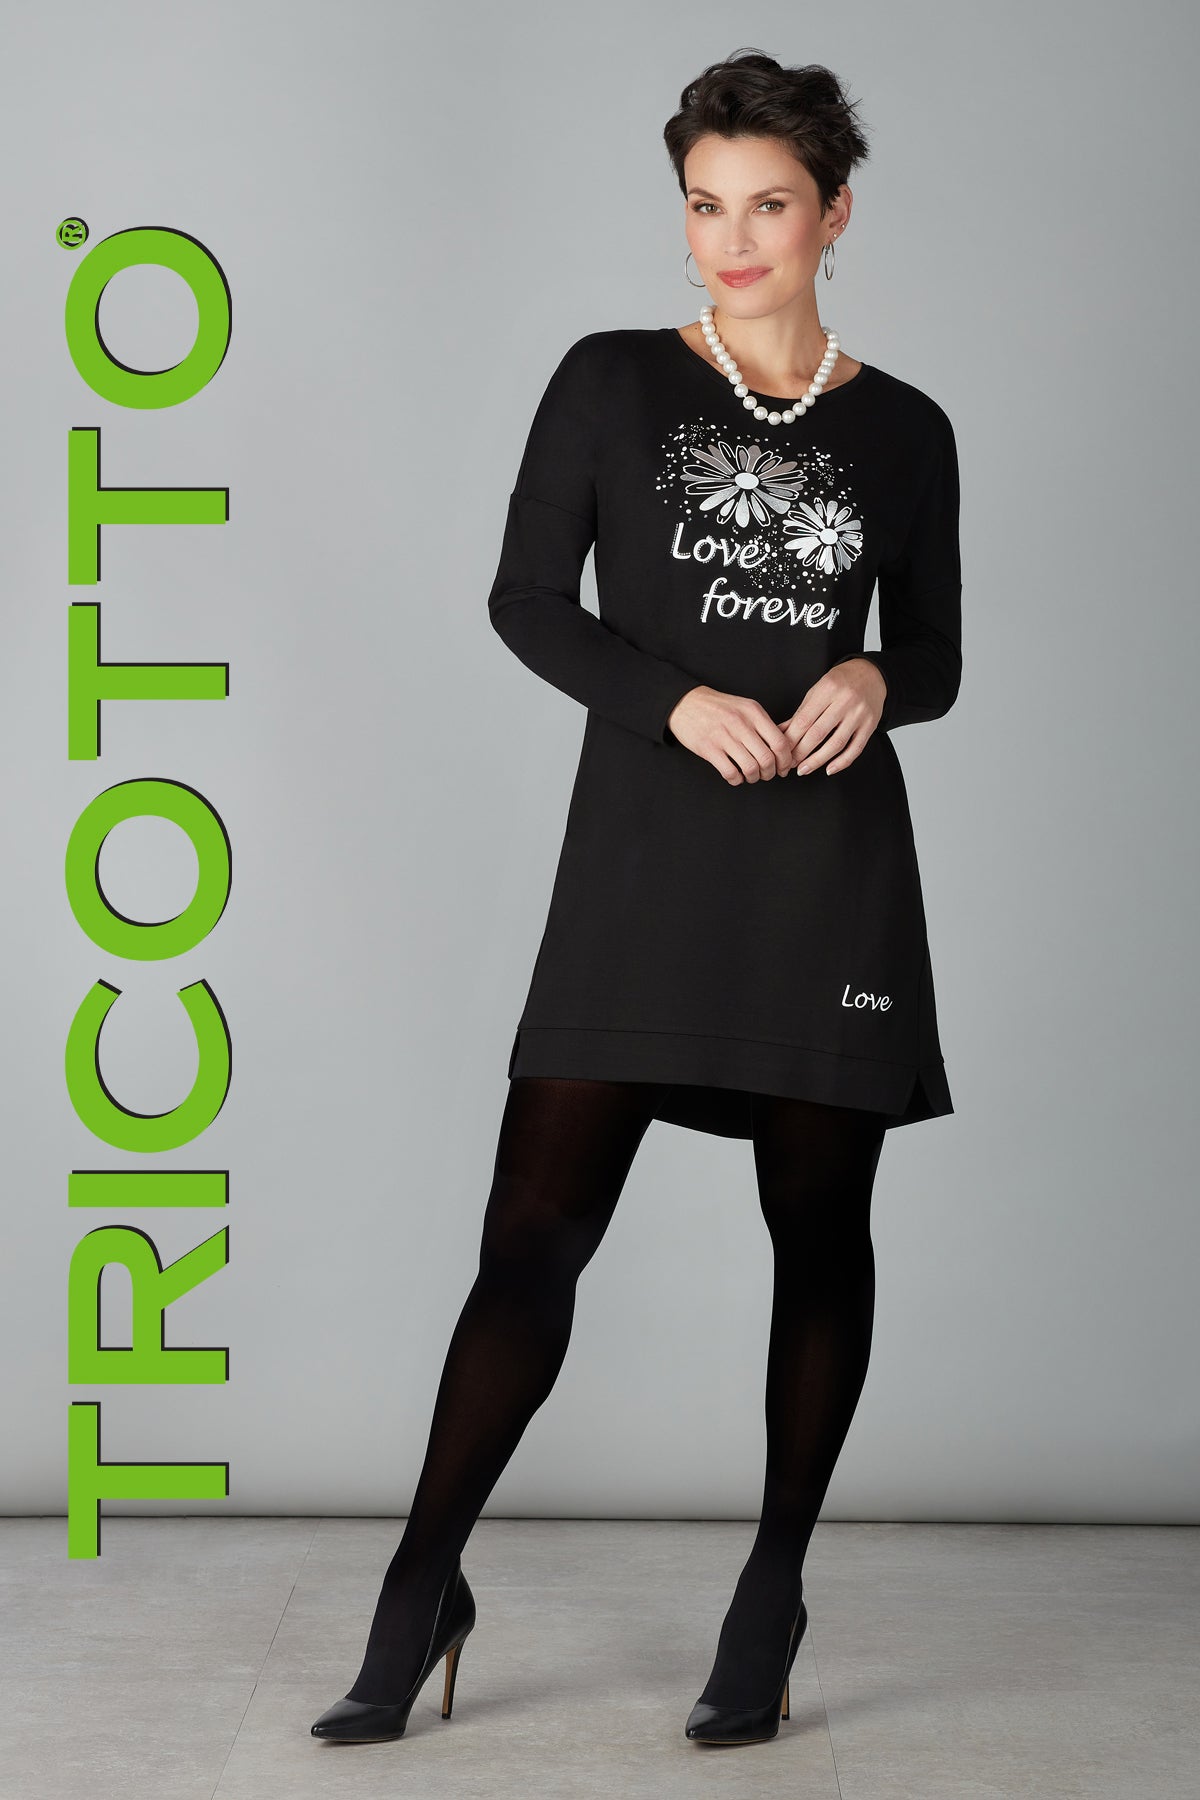 Tricotto Black Dress-Buy Tricotto Dresses Online Canada-Little Black Dresses Online-Tricotto Clothing Montreal